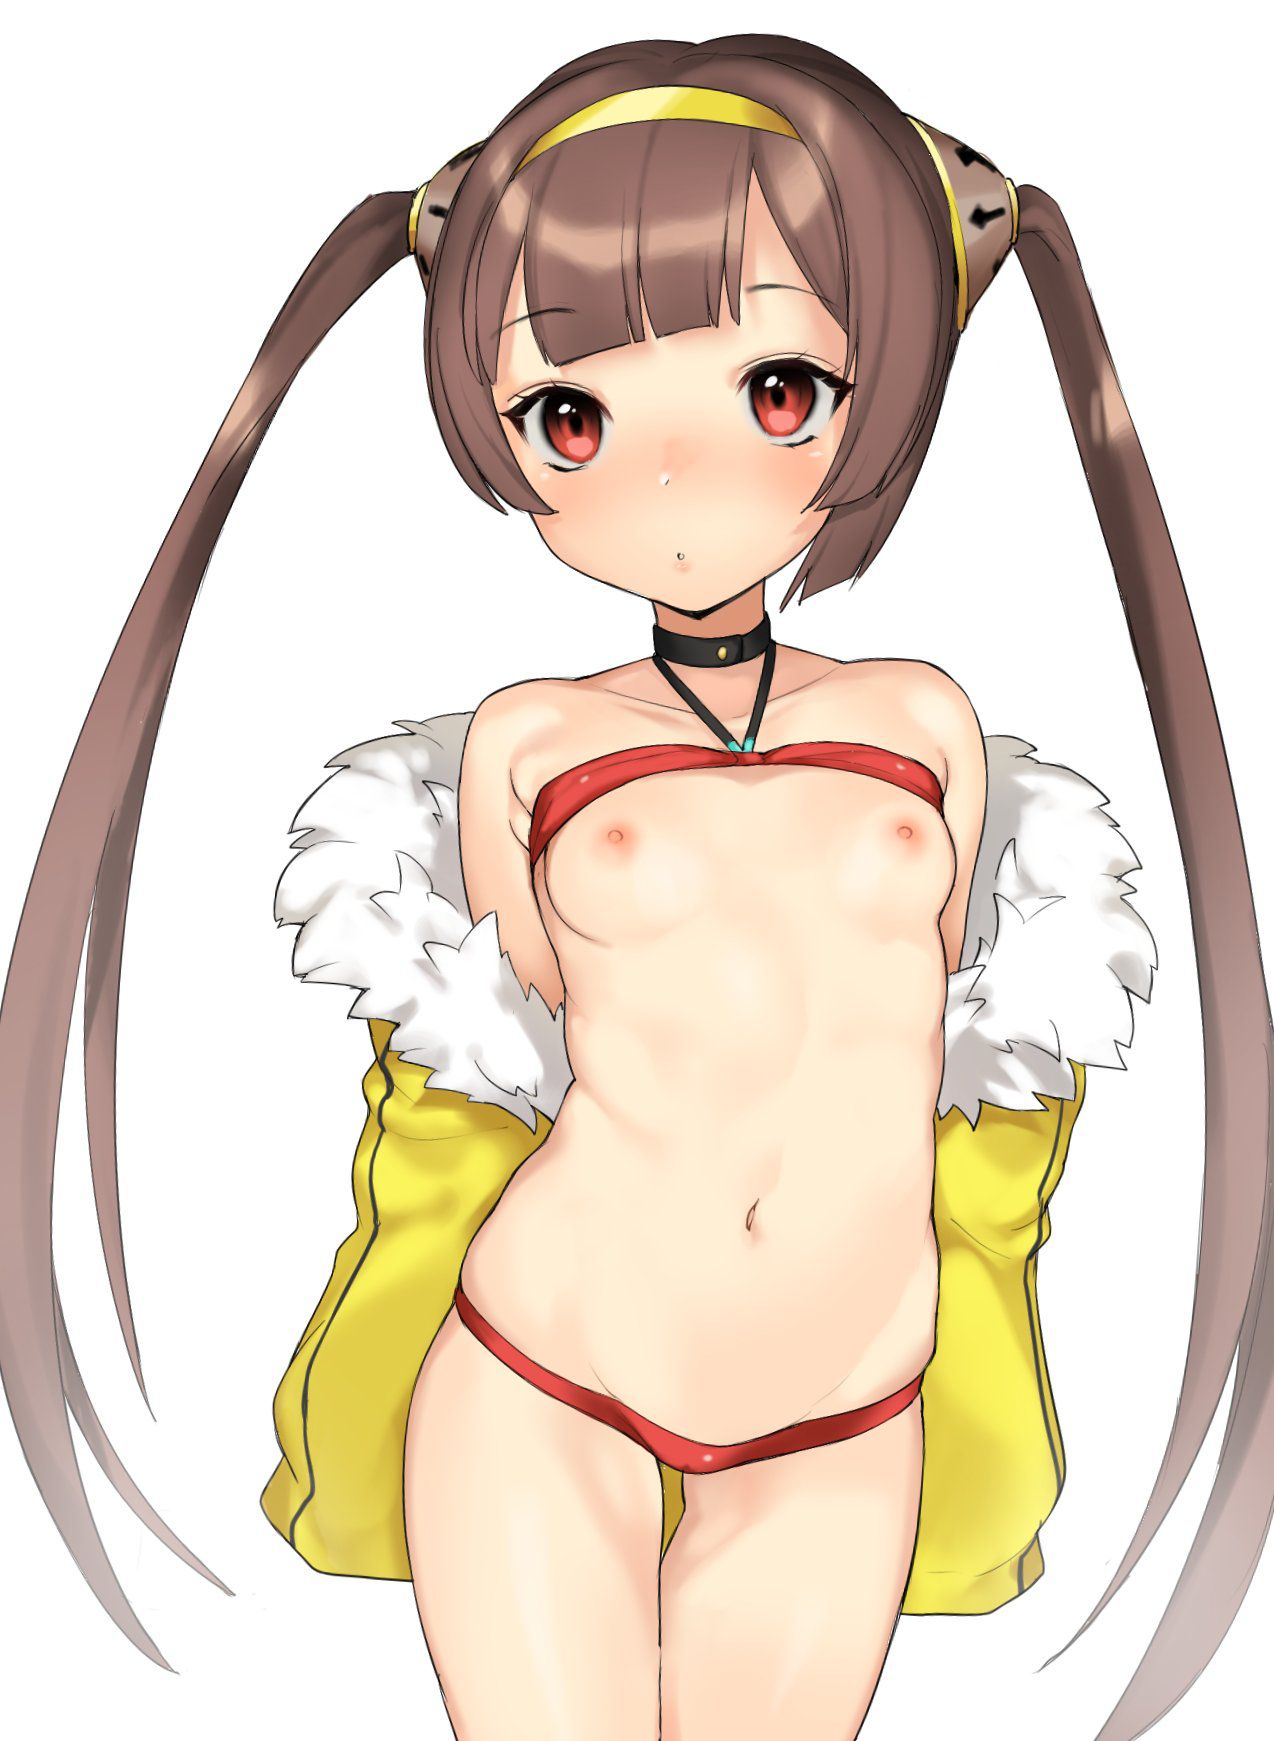 [Loli navel] charm of the navel of the soft-looking belly of Lori Girl! I tried to collect naughty images of the belly and the navel of Lori girl to enjoy the groin and the navel! 25